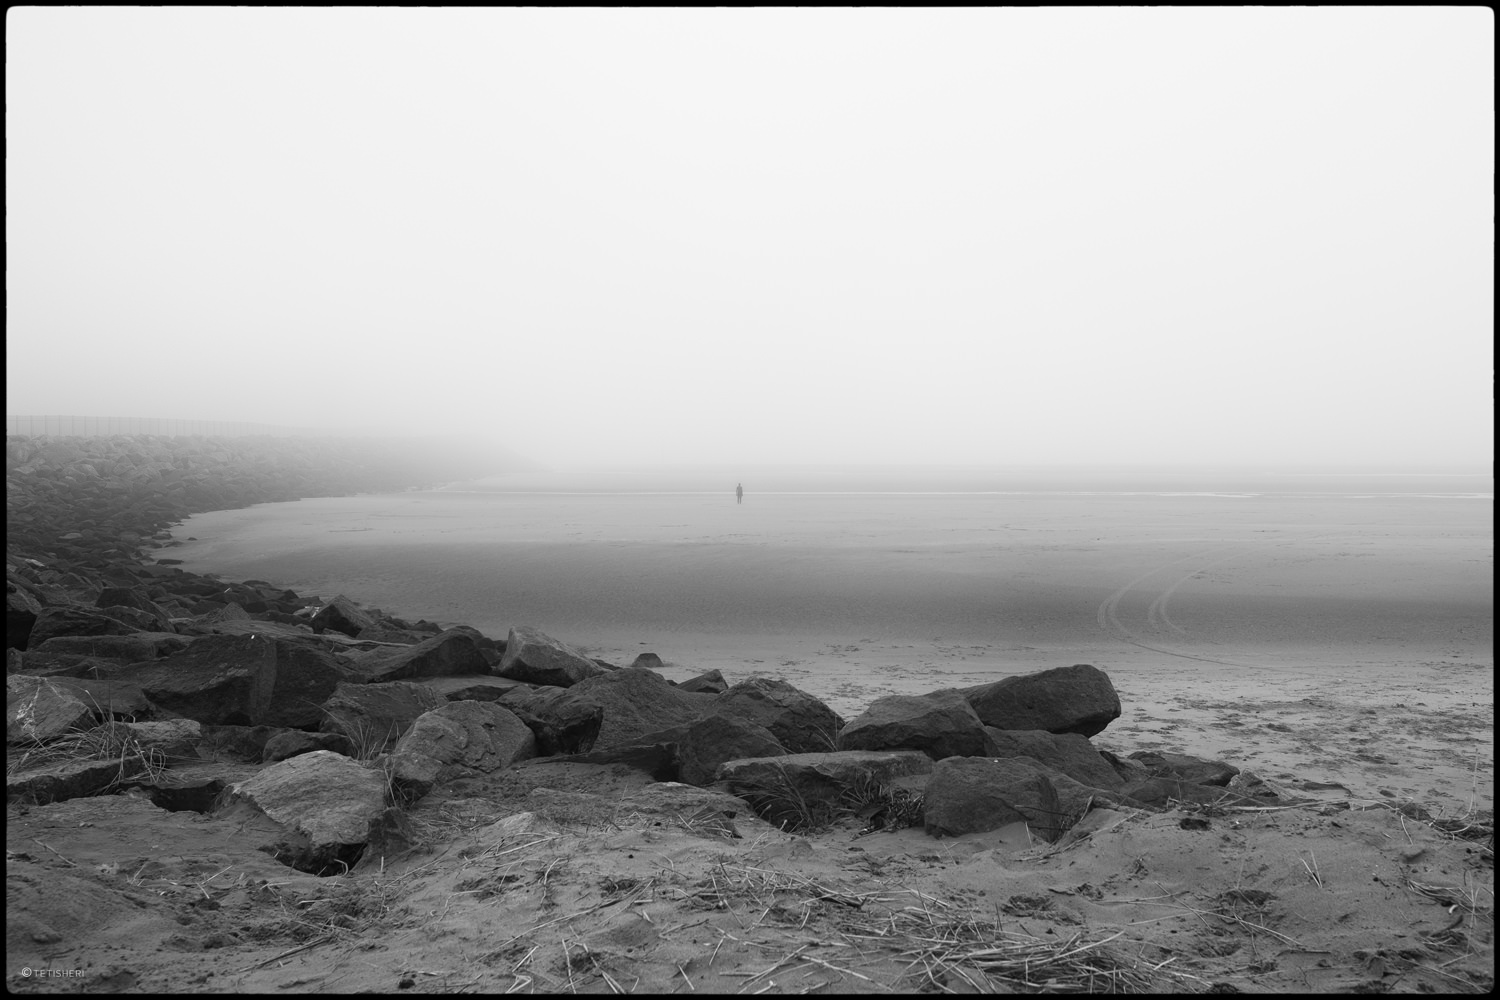 the approach to crosby beach on a foggy day with rocks in the foreground